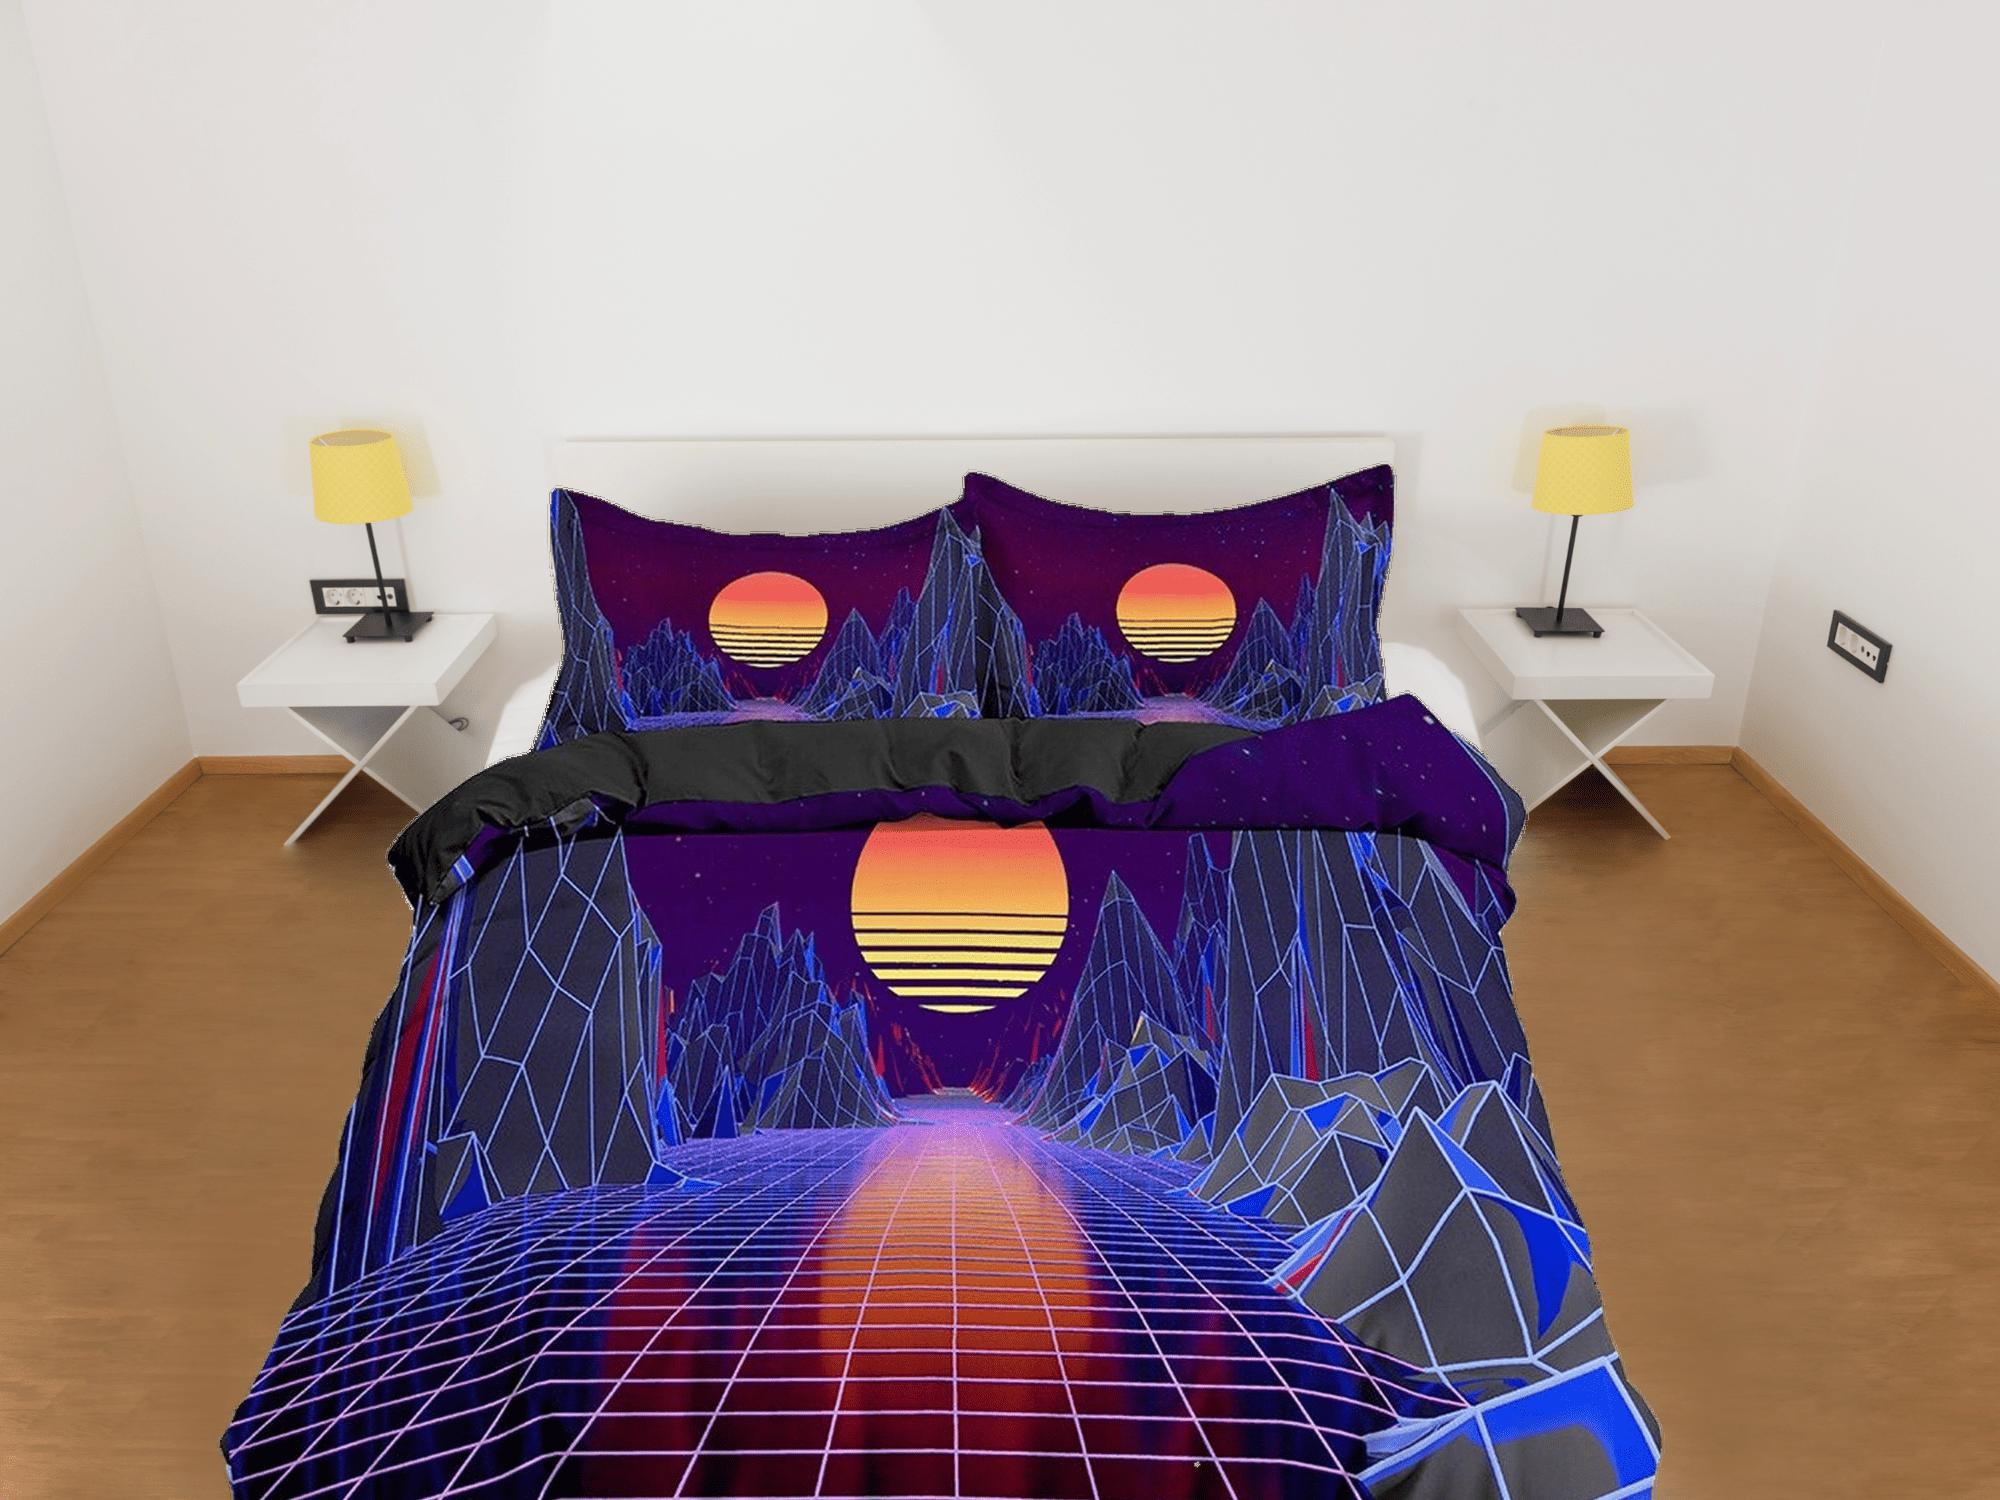 daintyduvet Dark Colored Vaporwave Bedding with Mountains and Sunset, Cool Hippie Duvet Cover Set for Boys Bedroom, Trippy Psychedelic Bed Cover 90s